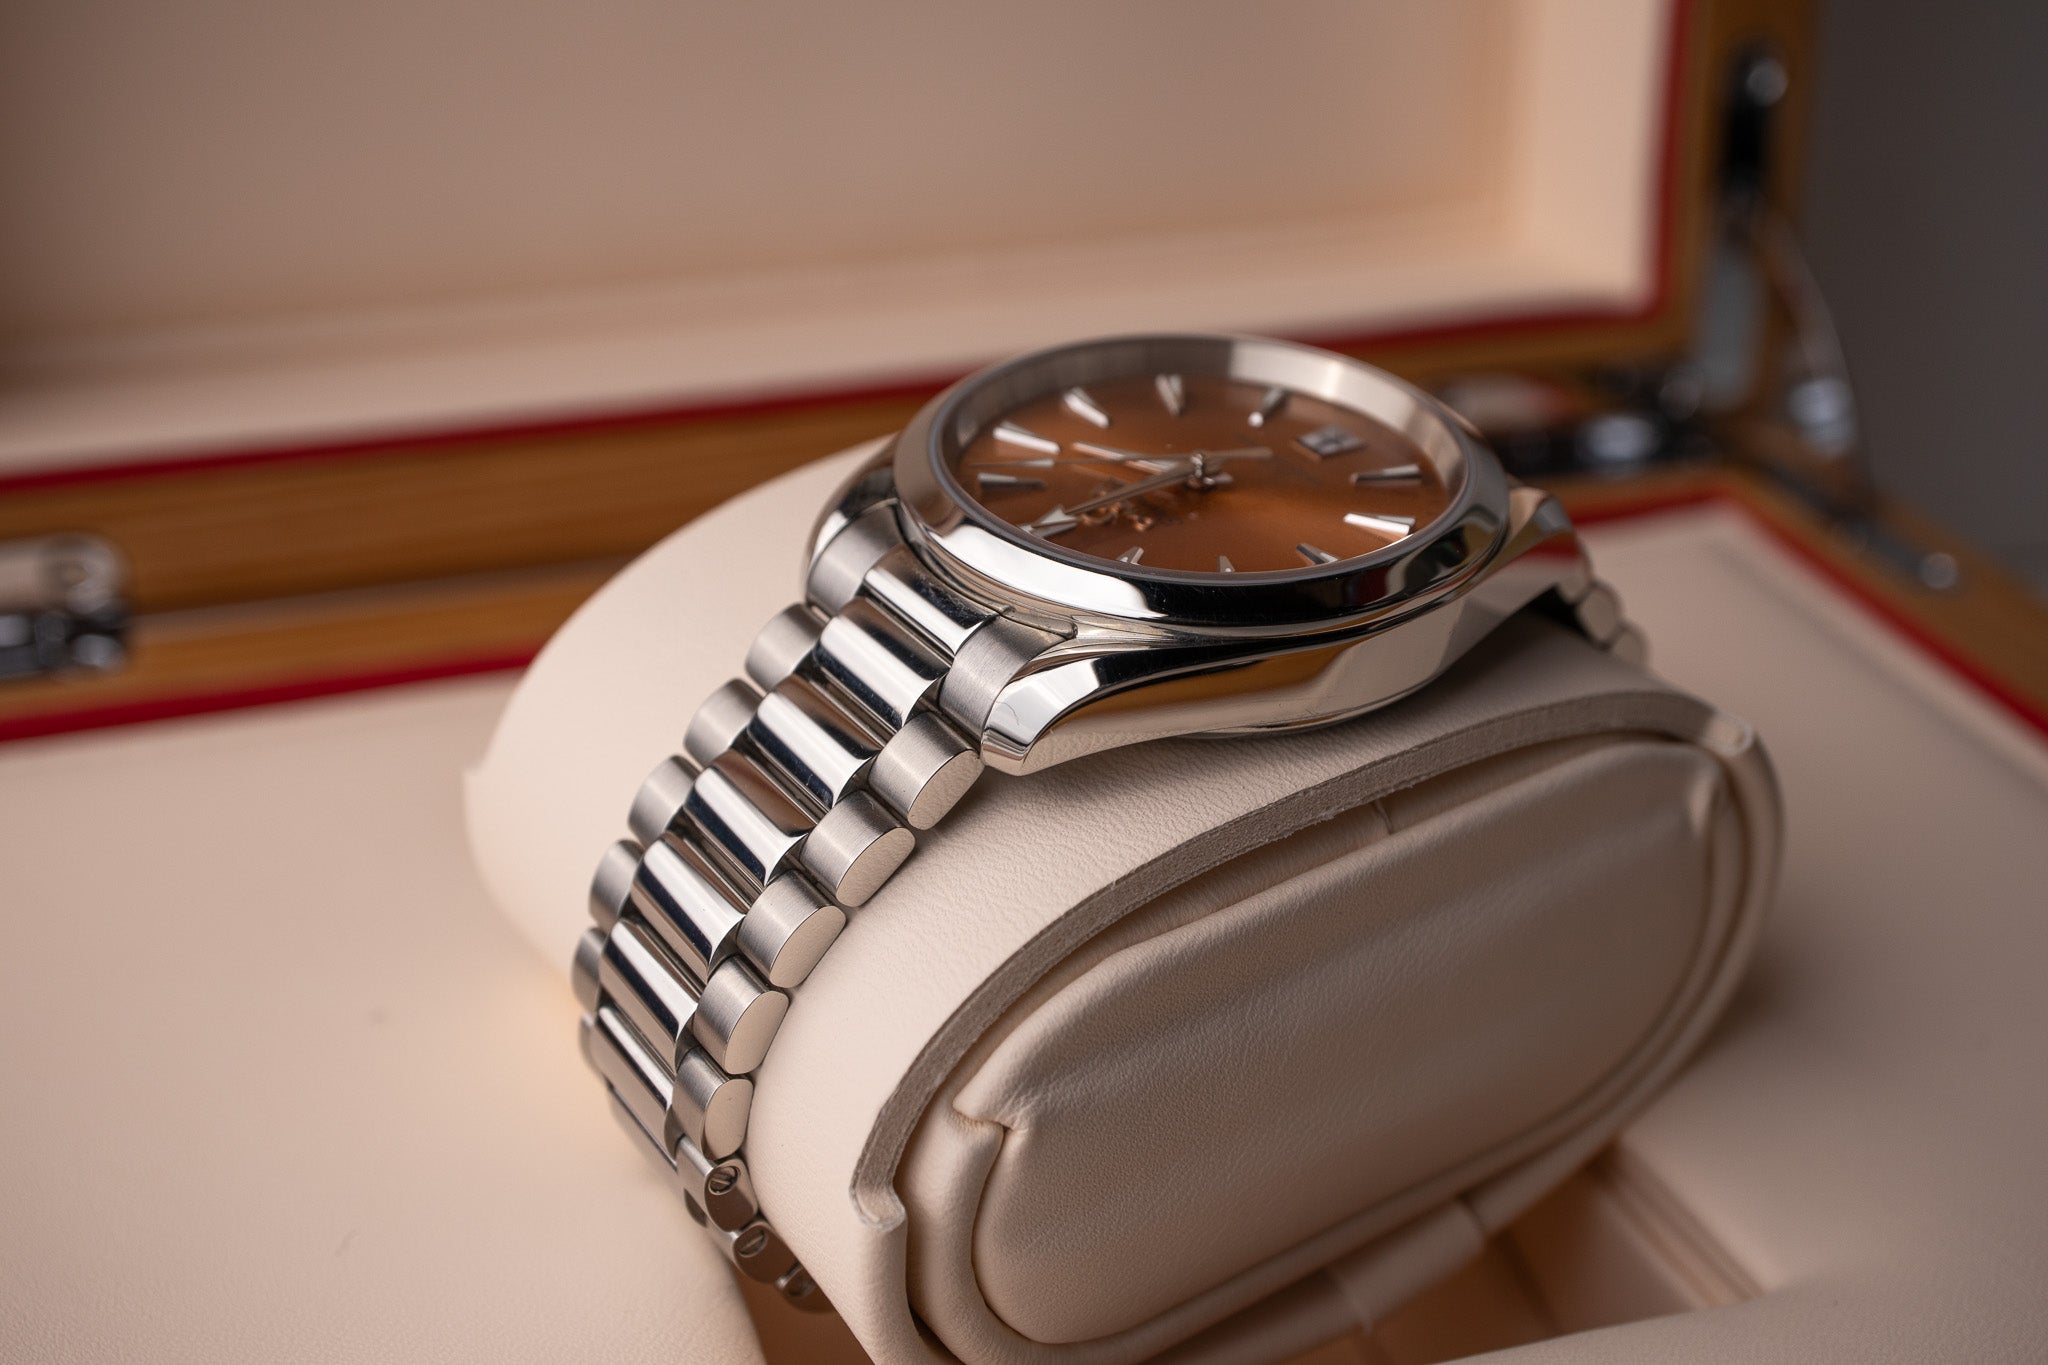 Omega Seamaster Aqua Terra Shades Reference 220.10.38.20.12.001 Saffron dial Men's Watch top left side of case and lug